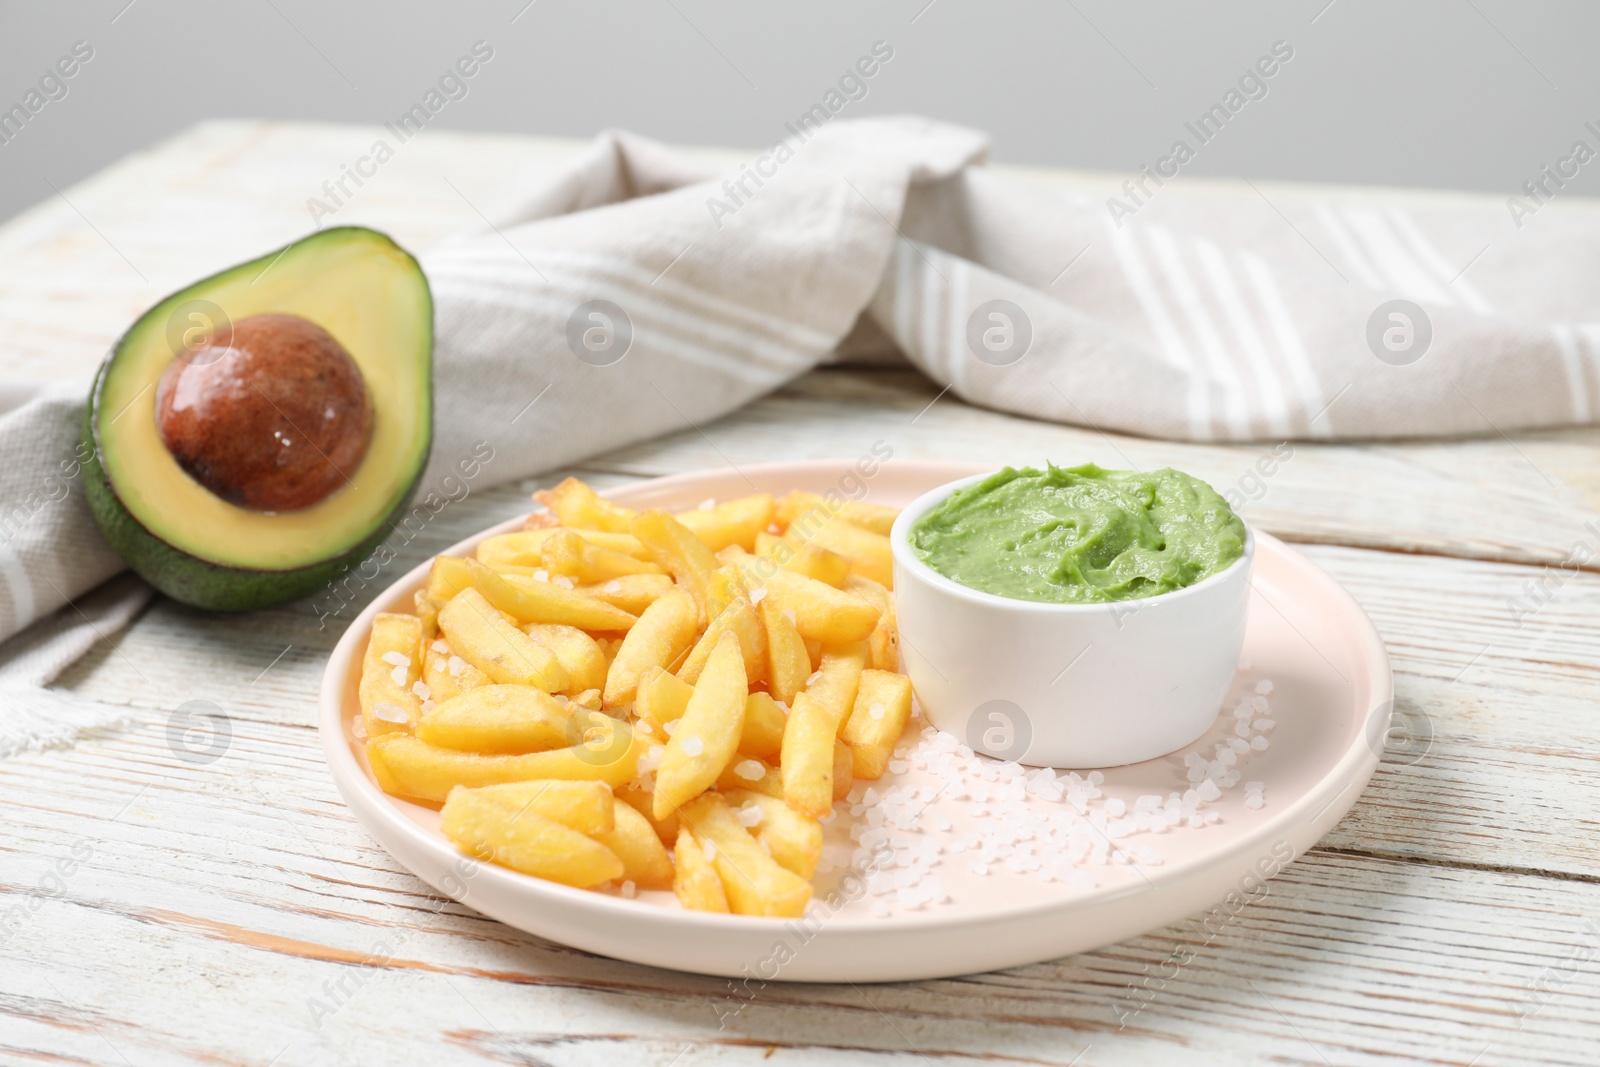 Photo of Plate with french fries, avocado and guacamole dip on white wooden table